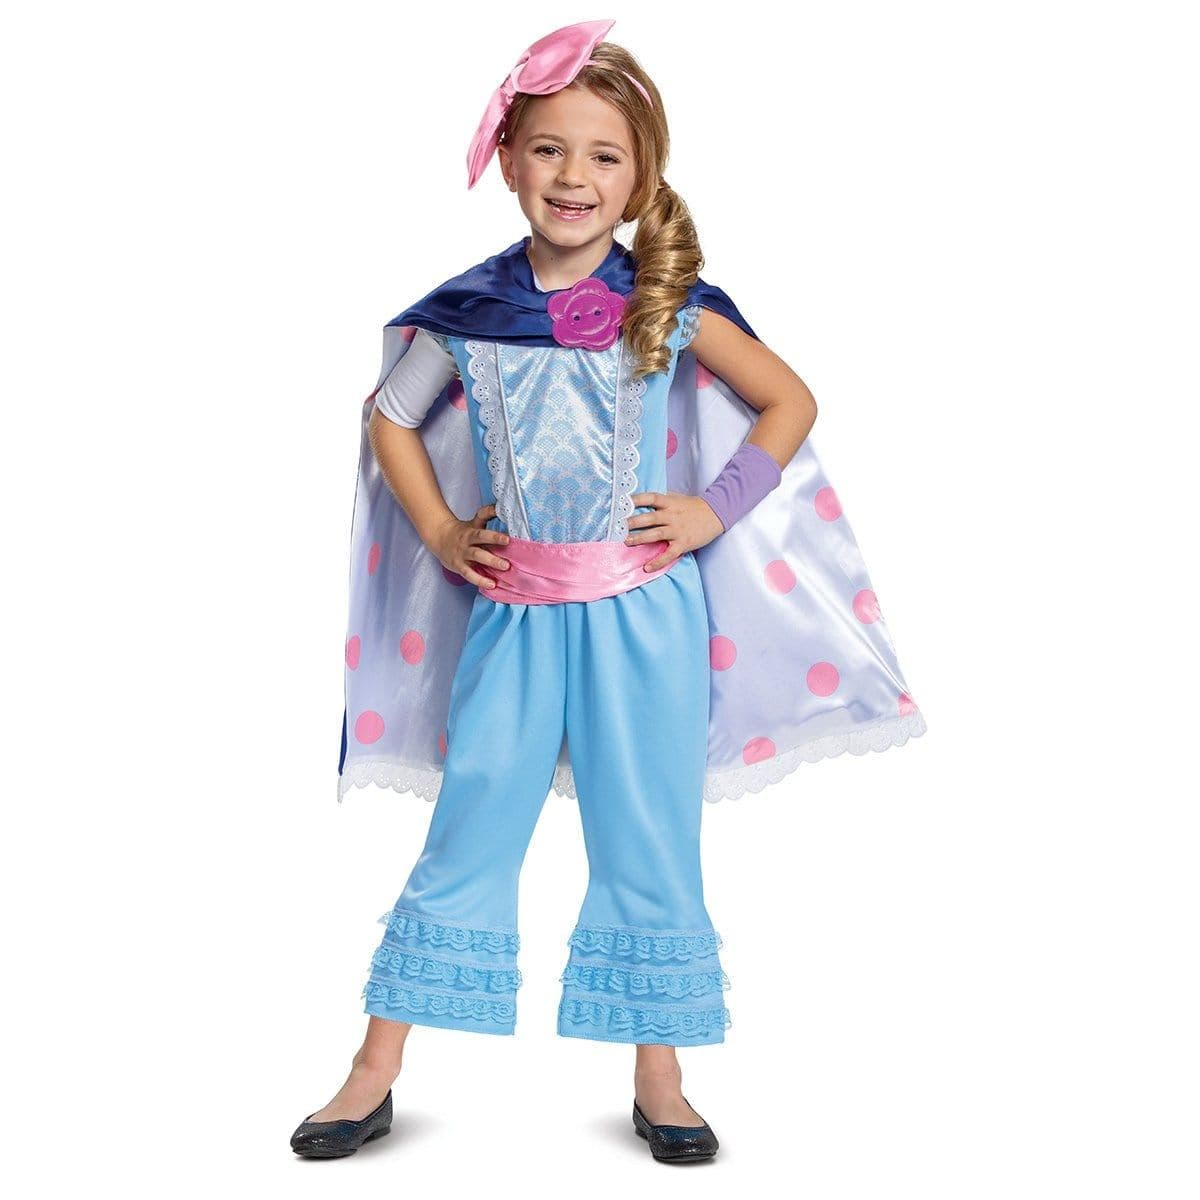 Buy Costumes Bo Peep Costume for Kids, Toy Story 4 sold at Party Expert